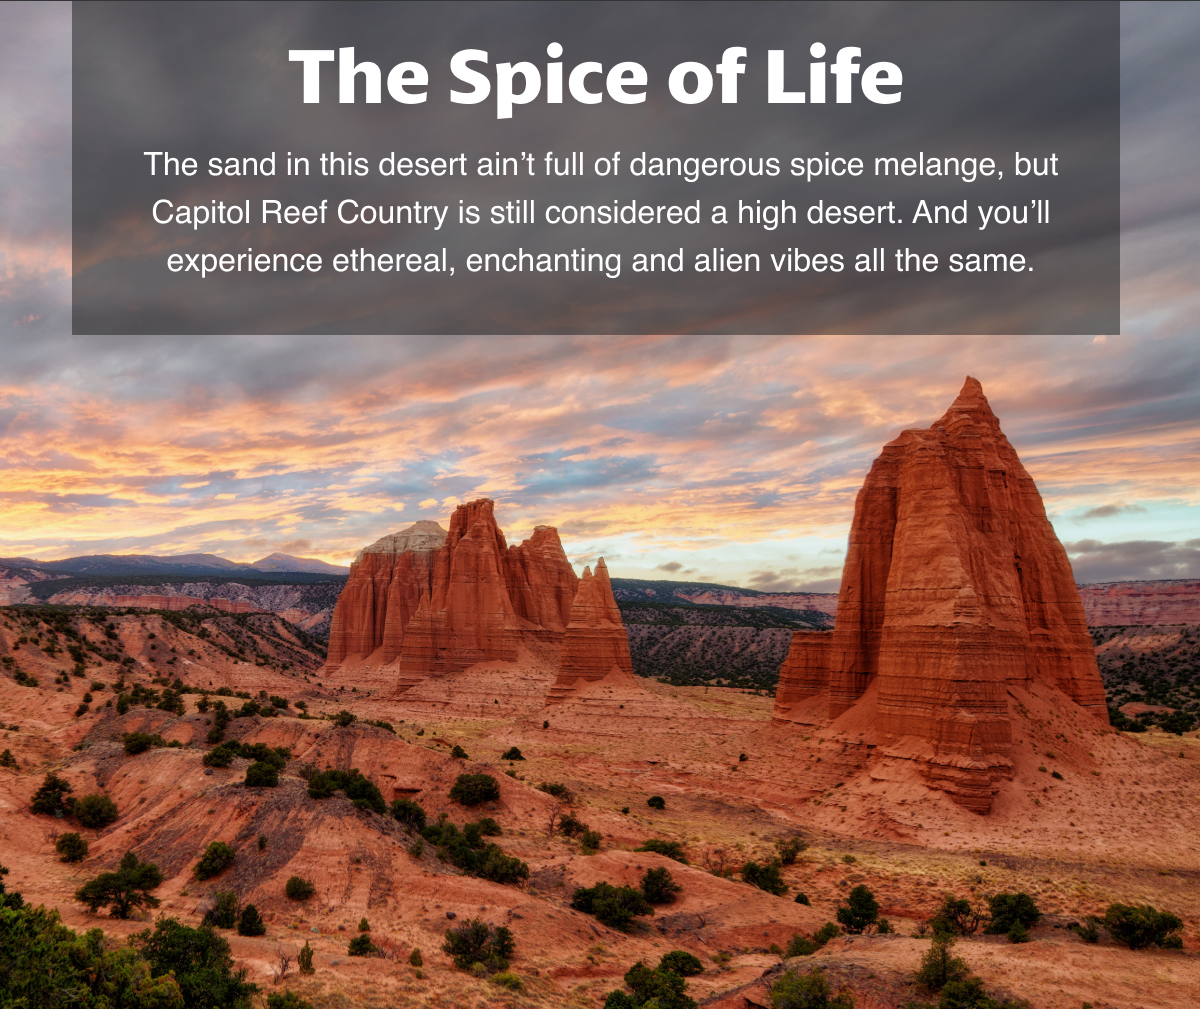 The Spice of Life | The sand in this desert ain’t full of dangerous spice melange, but Capitol Reef Country is still considered a high desert. And you’ll experience ethereal, enchanting and alien vibes all the same.